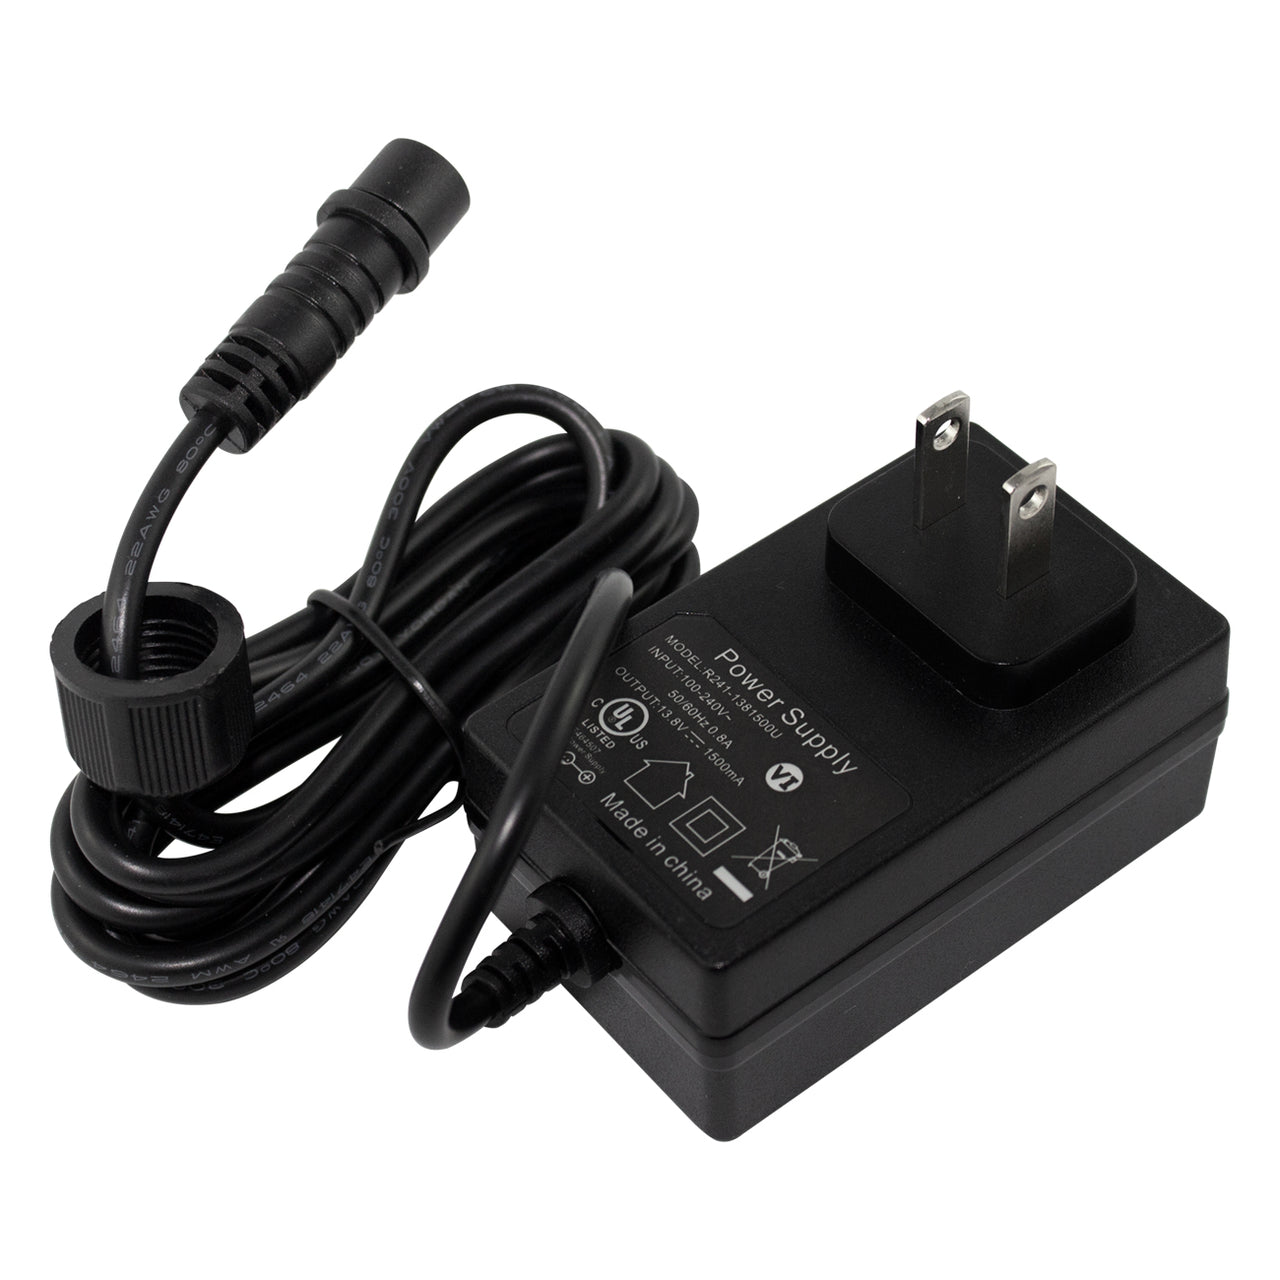 CORRAL replacement 110v power adapter for duo chargers